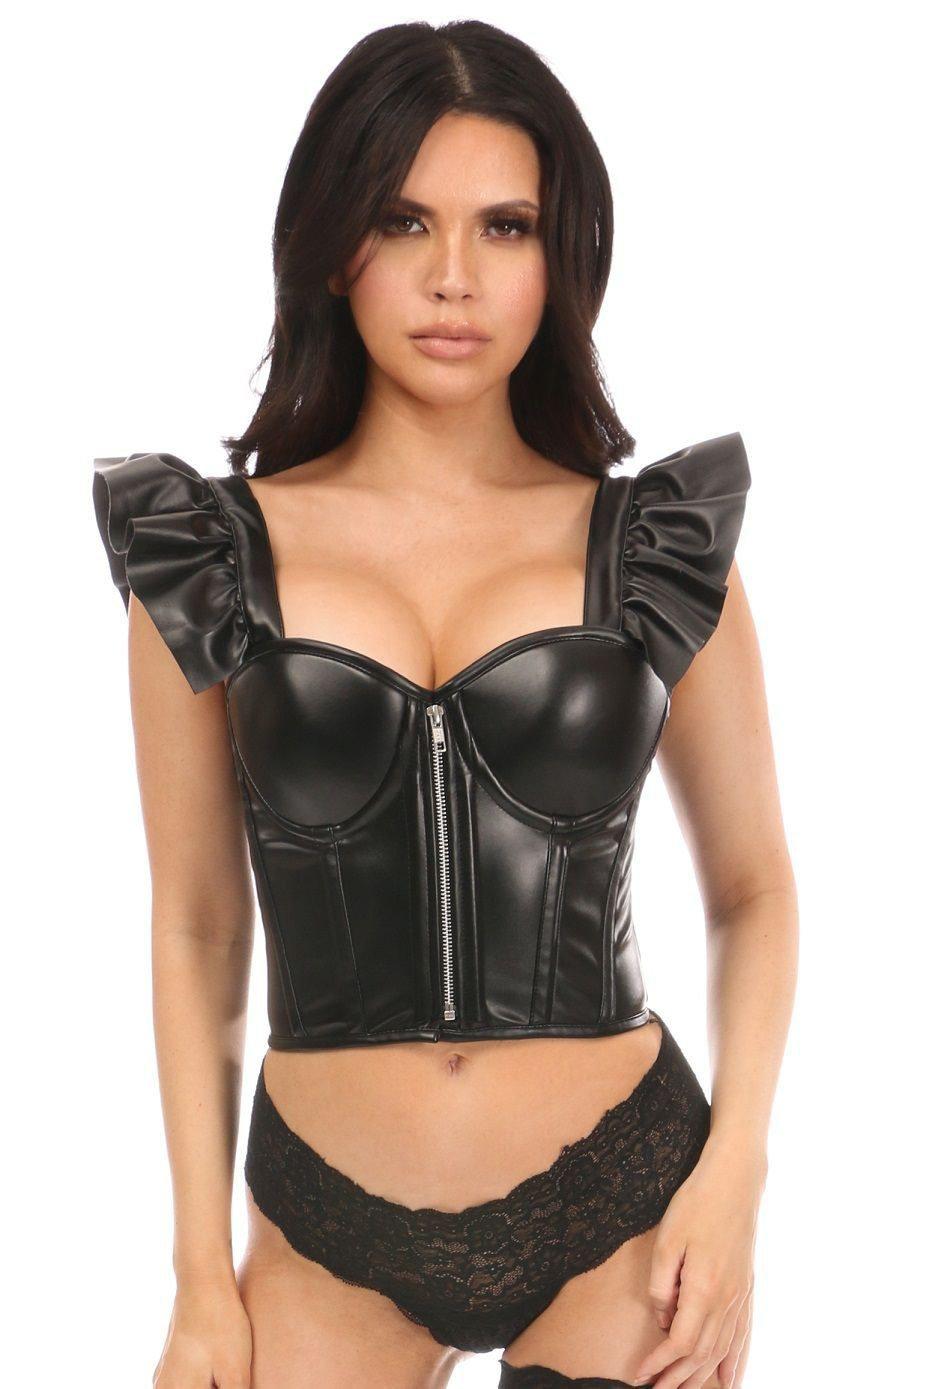 Plus Size Bustier with Ruffle Sleeves-Bustiers-Daisy Corsets-SEXYSHOES.COM